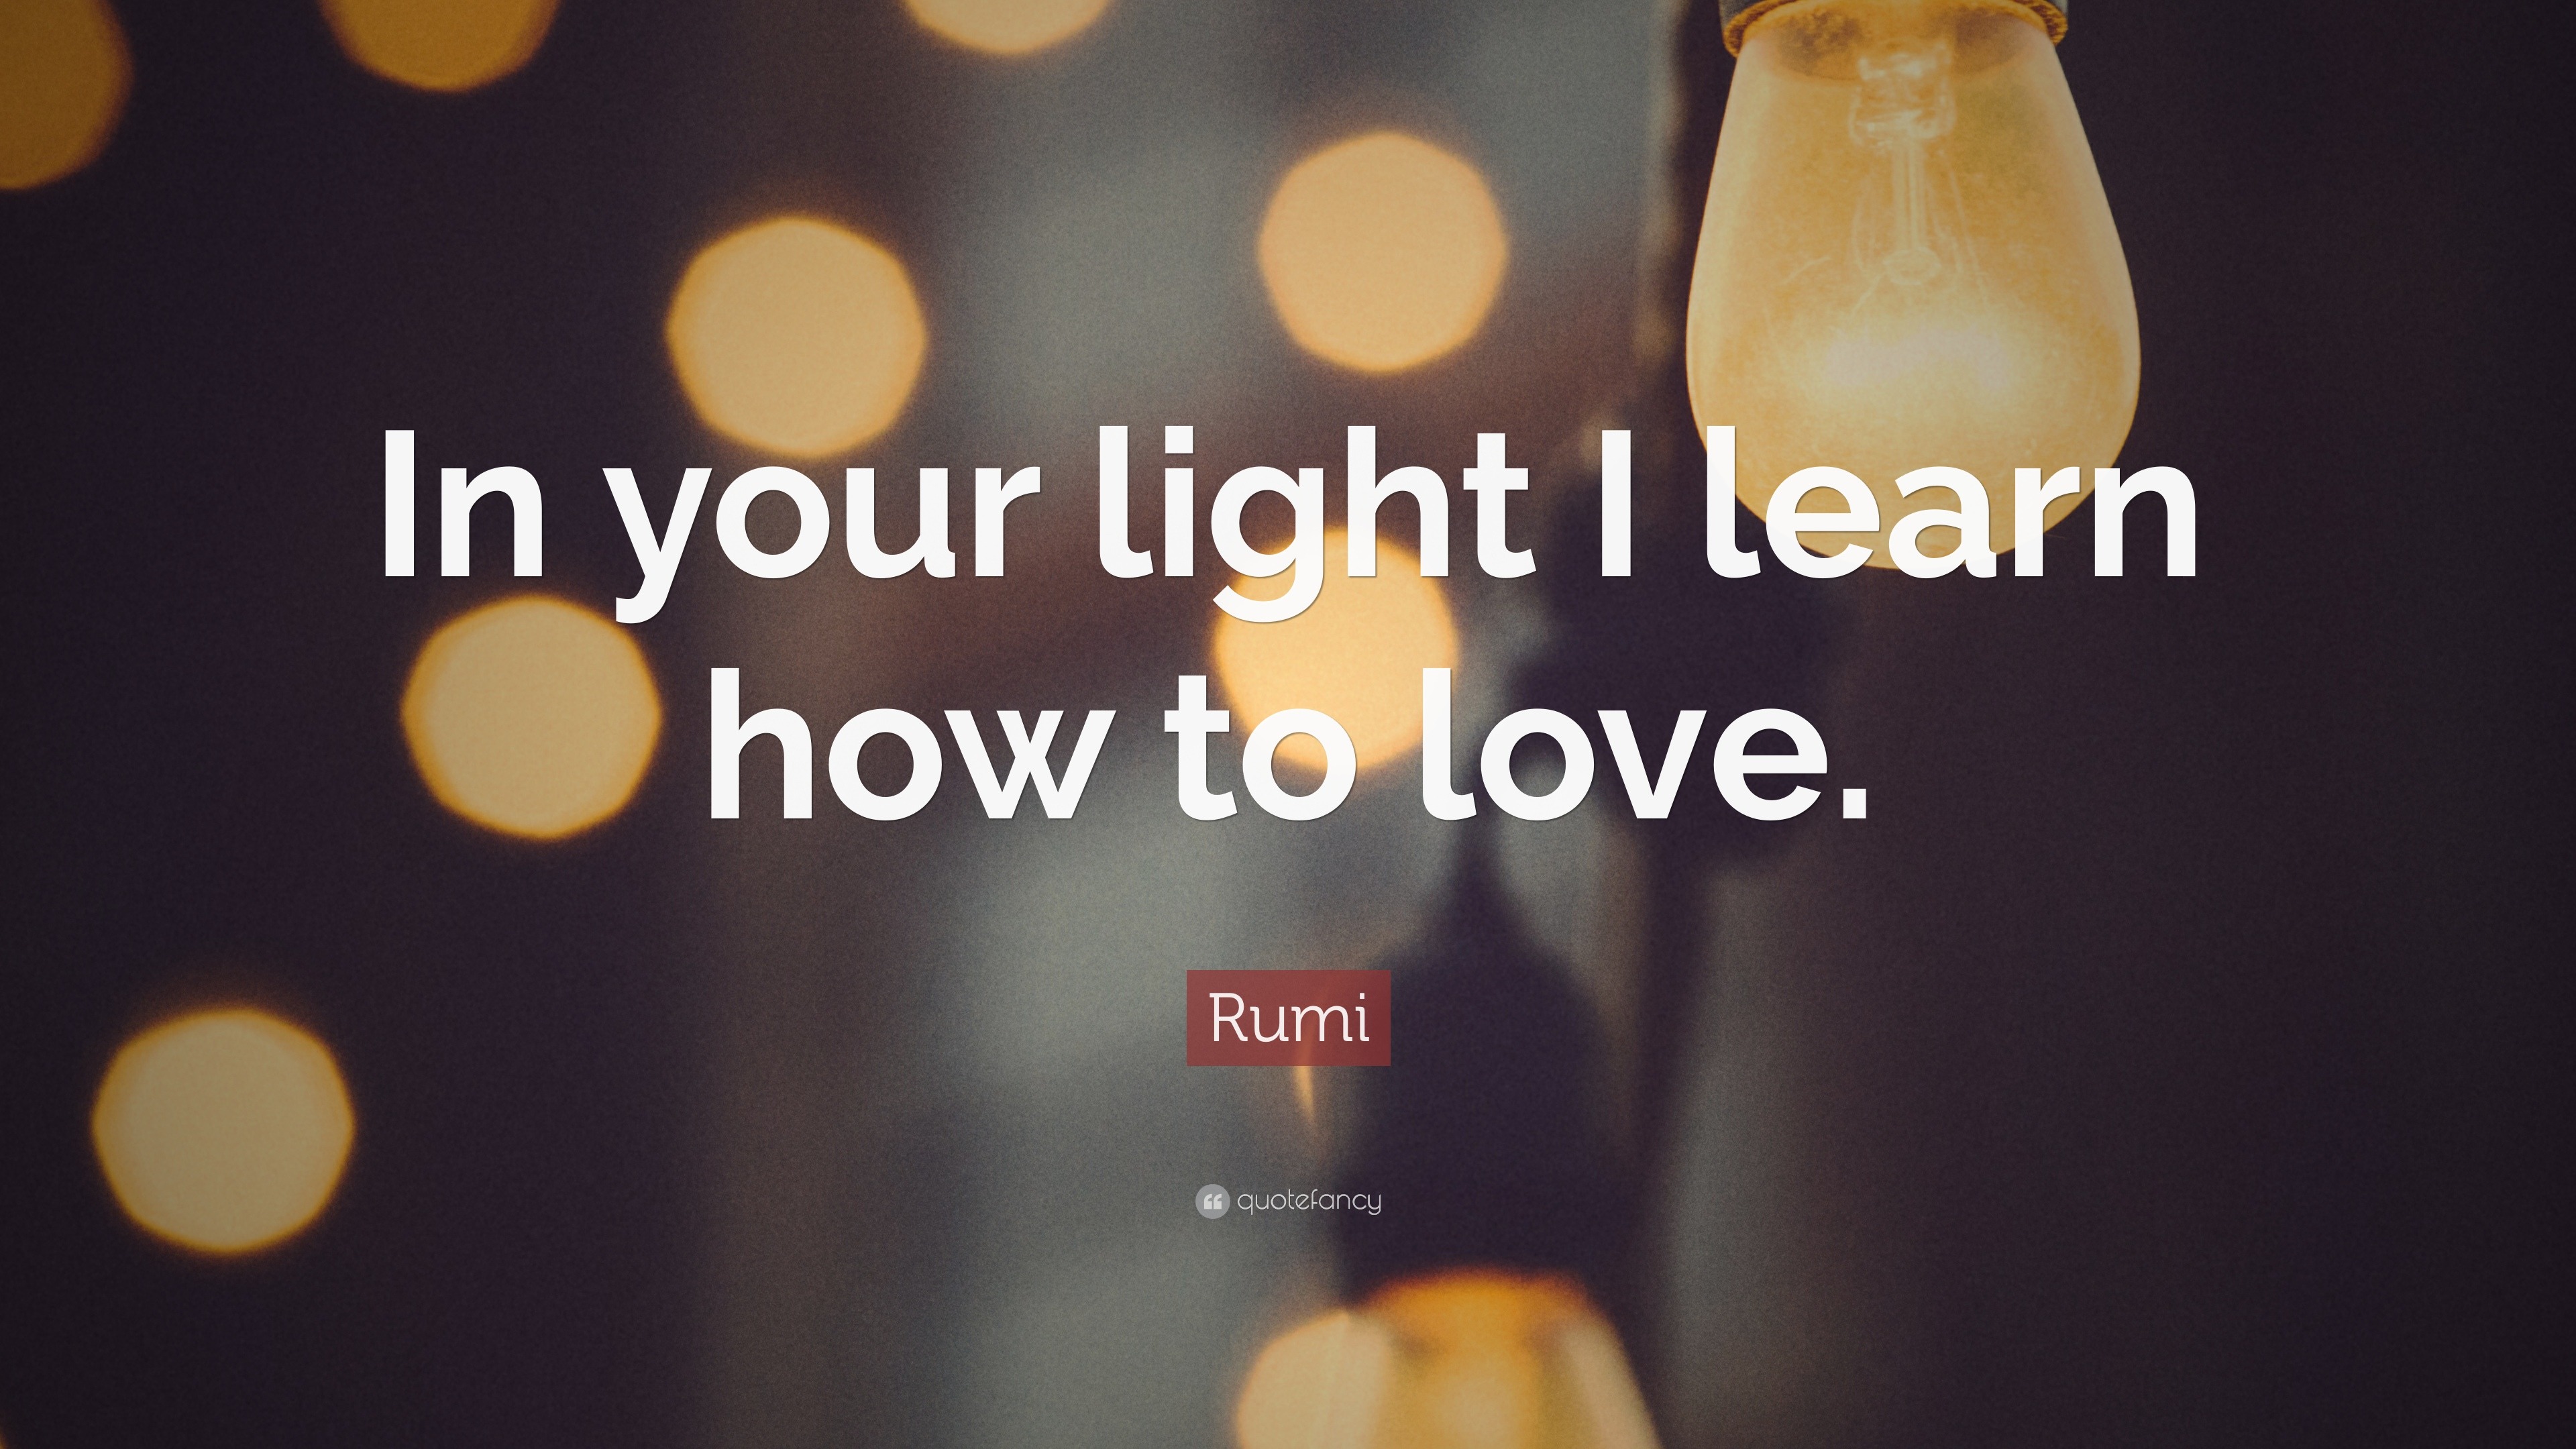 Madison fantastisk udstødning Rumi Quote: “In your light I learn how to love.”